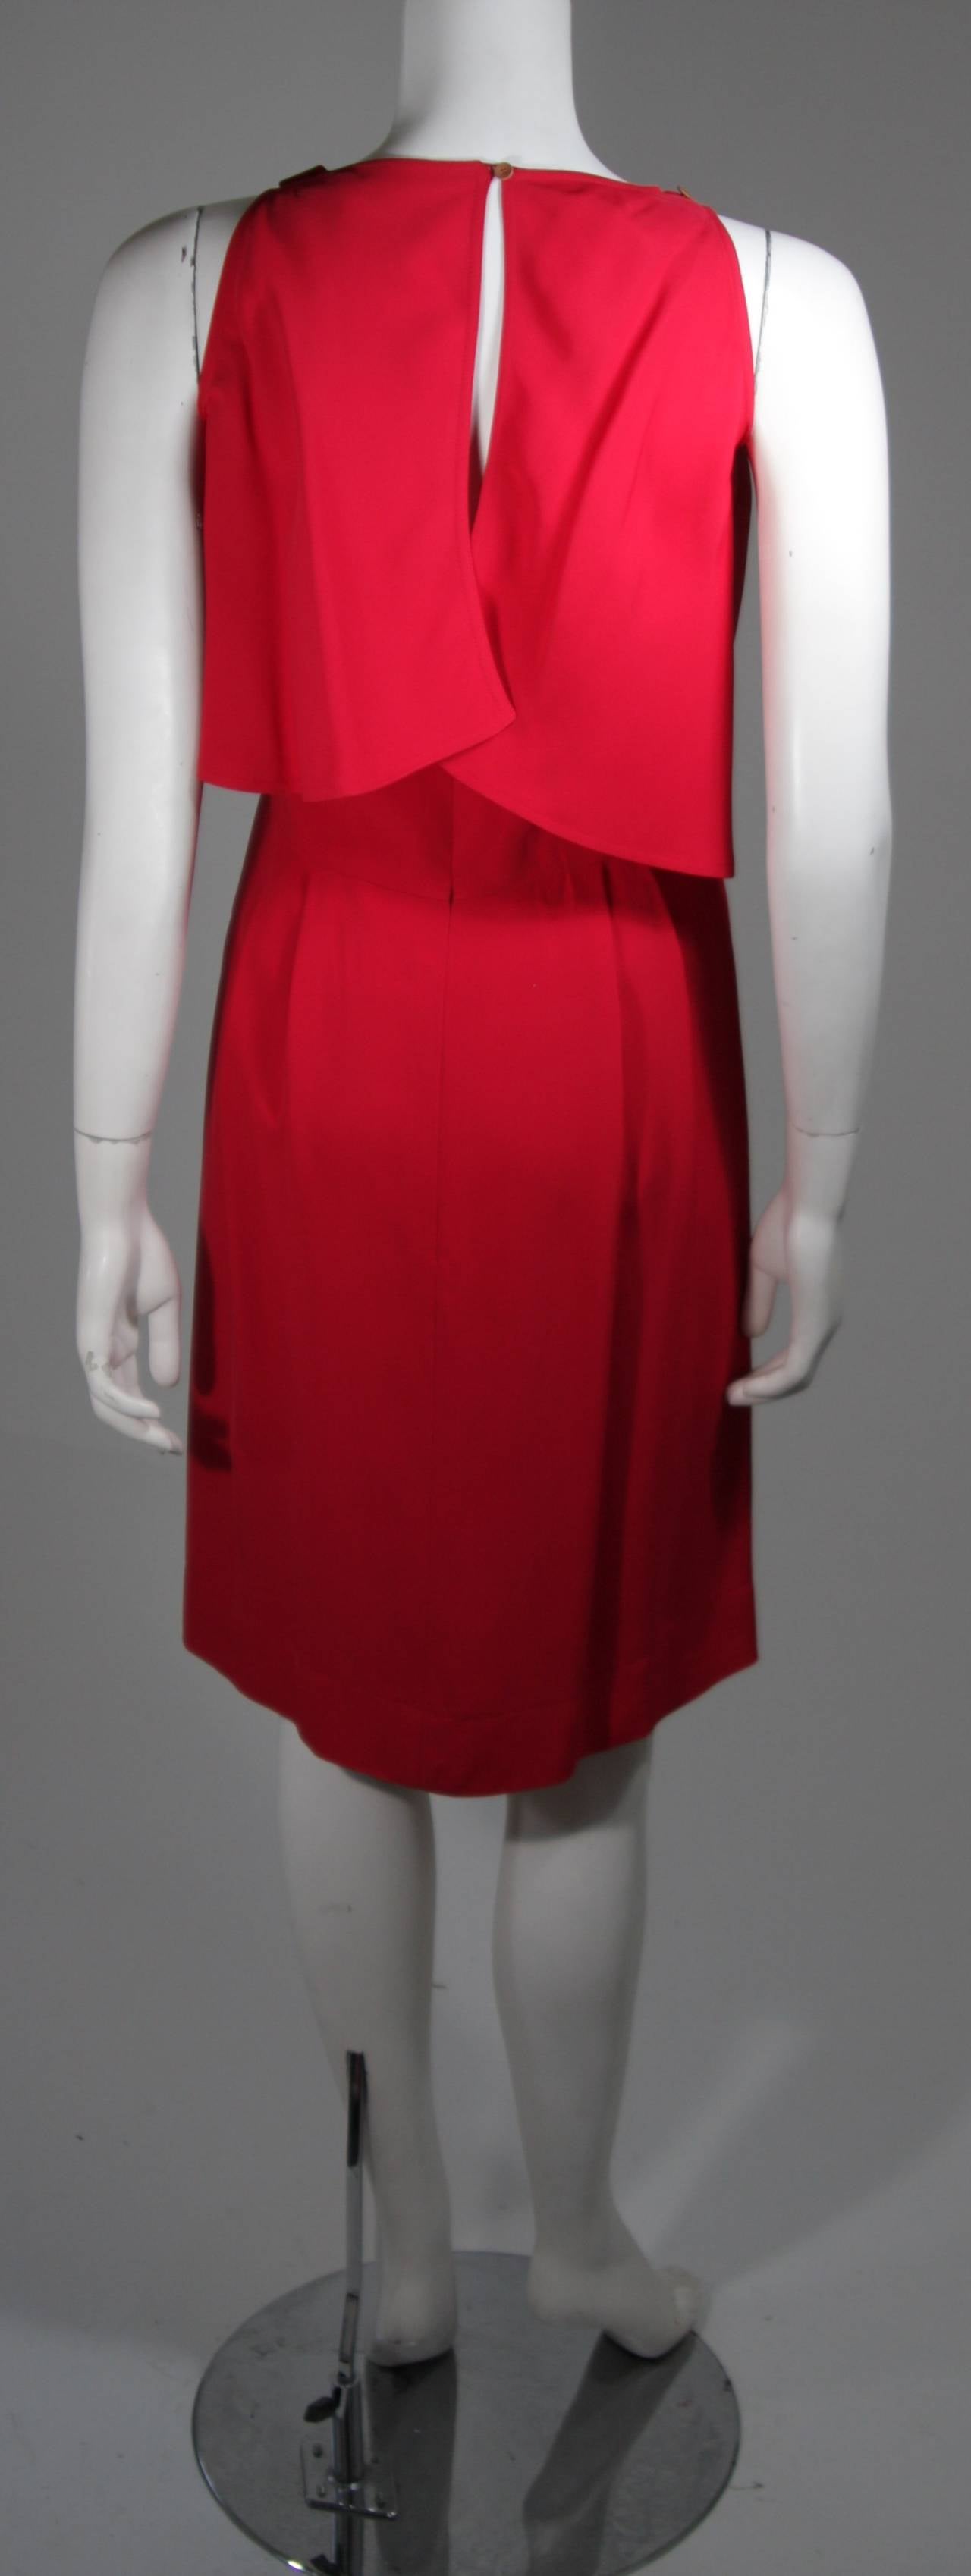 Fendi Red Cocktail Dress with Caplet Attachment and Button Details Size 2 For Sale 1